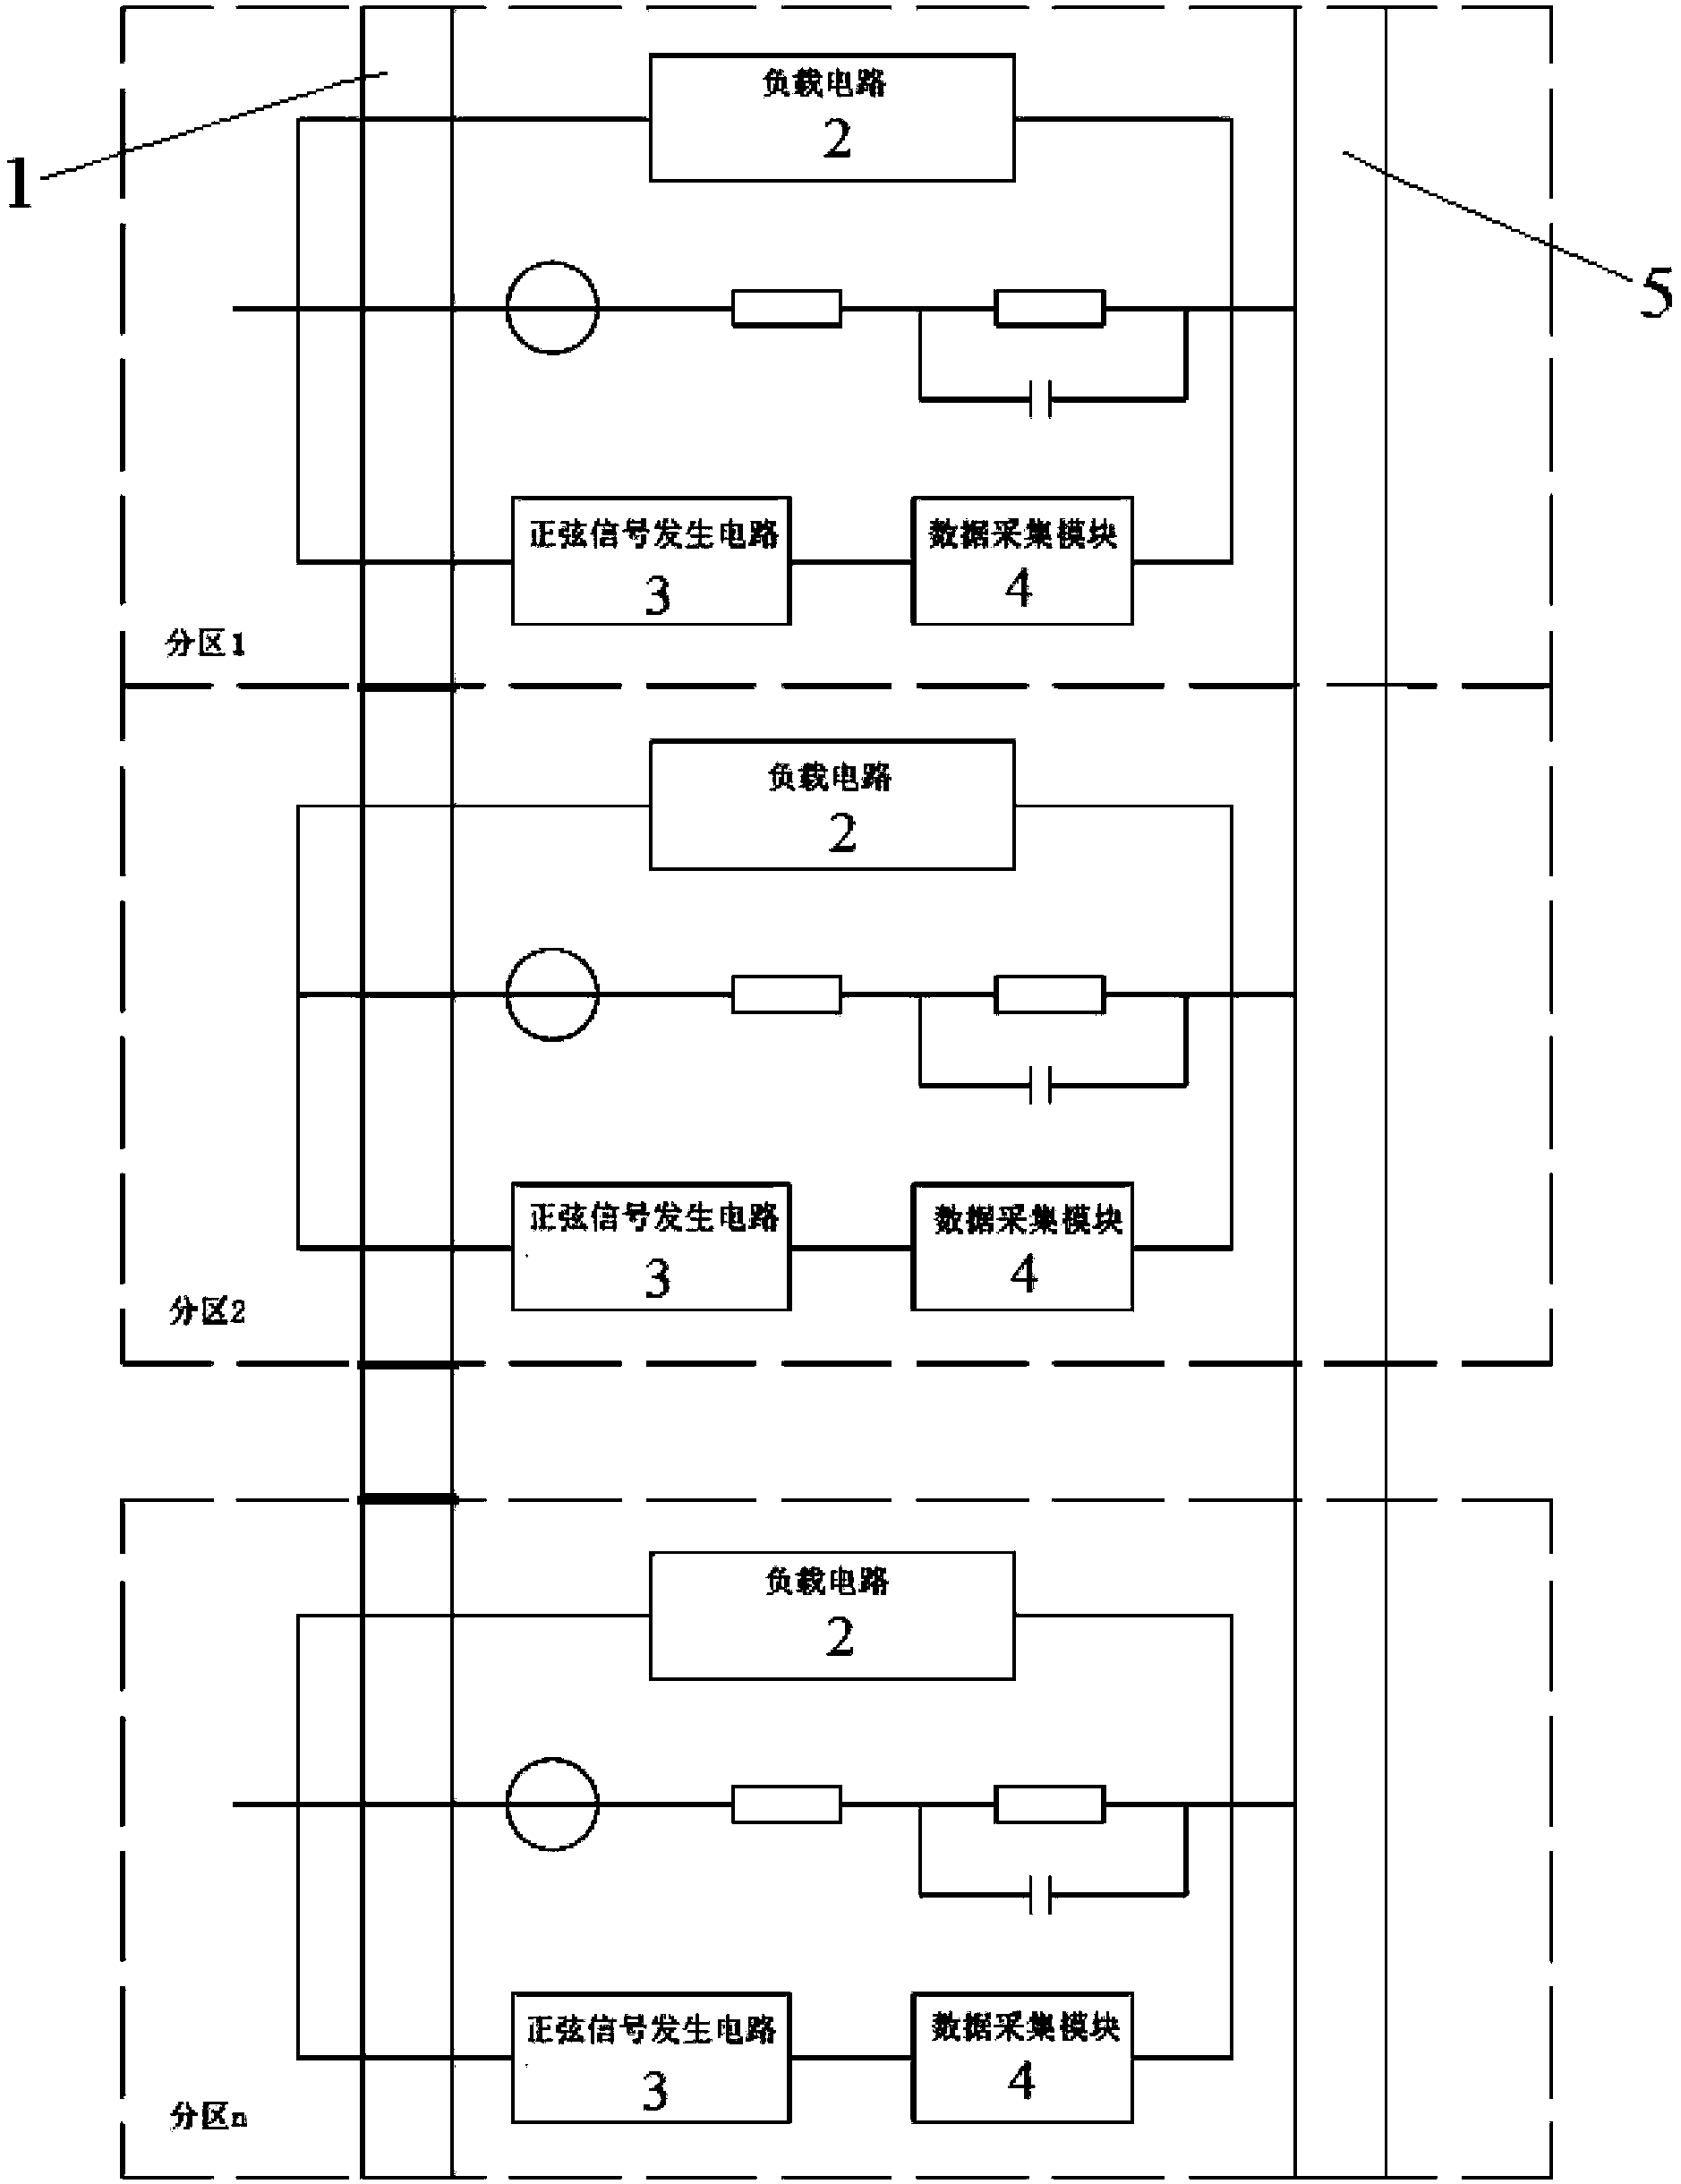 Online test system and method for alternating-current impedances of fuel cell zones